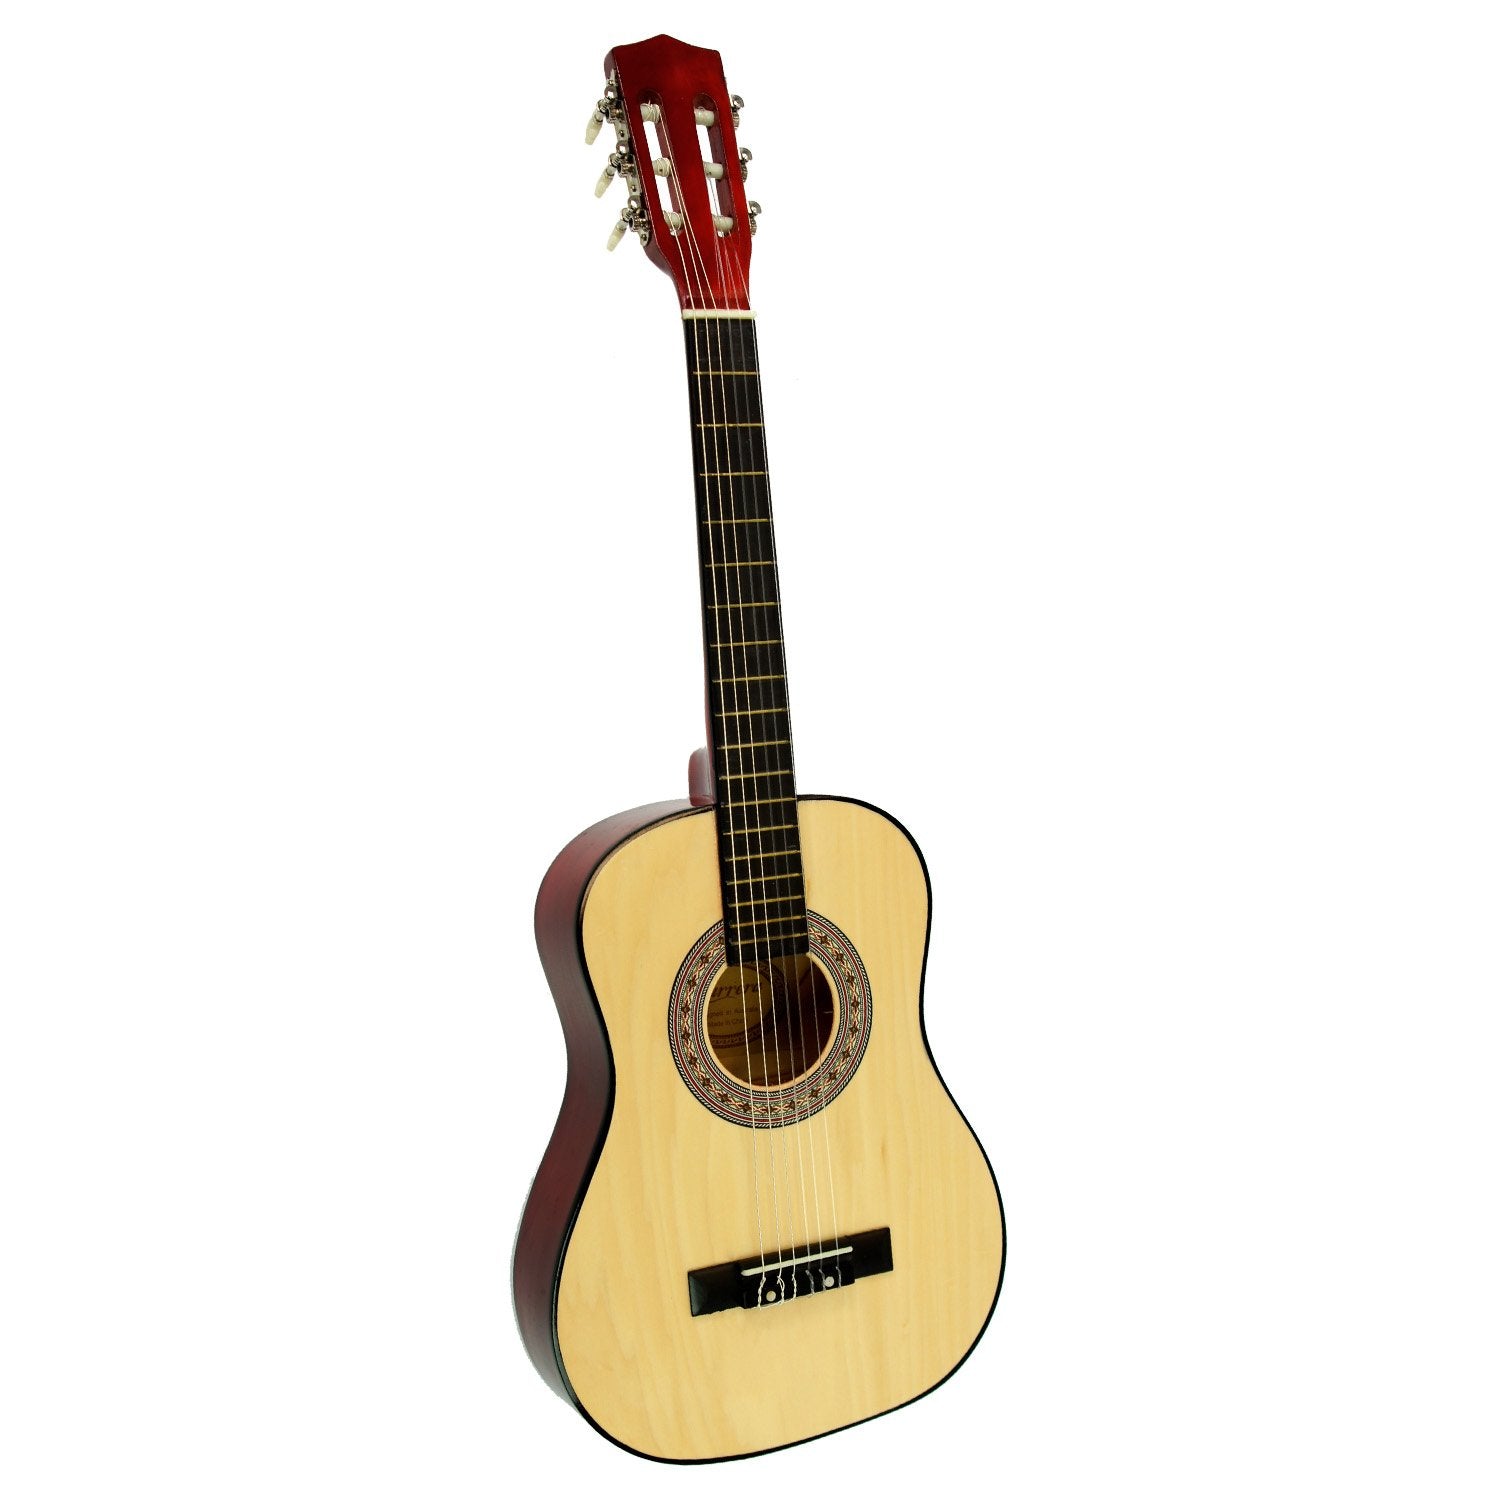 Karrera Childrens Guitar  Wooden 34in Acoustic - Natural - SILBERSHELL